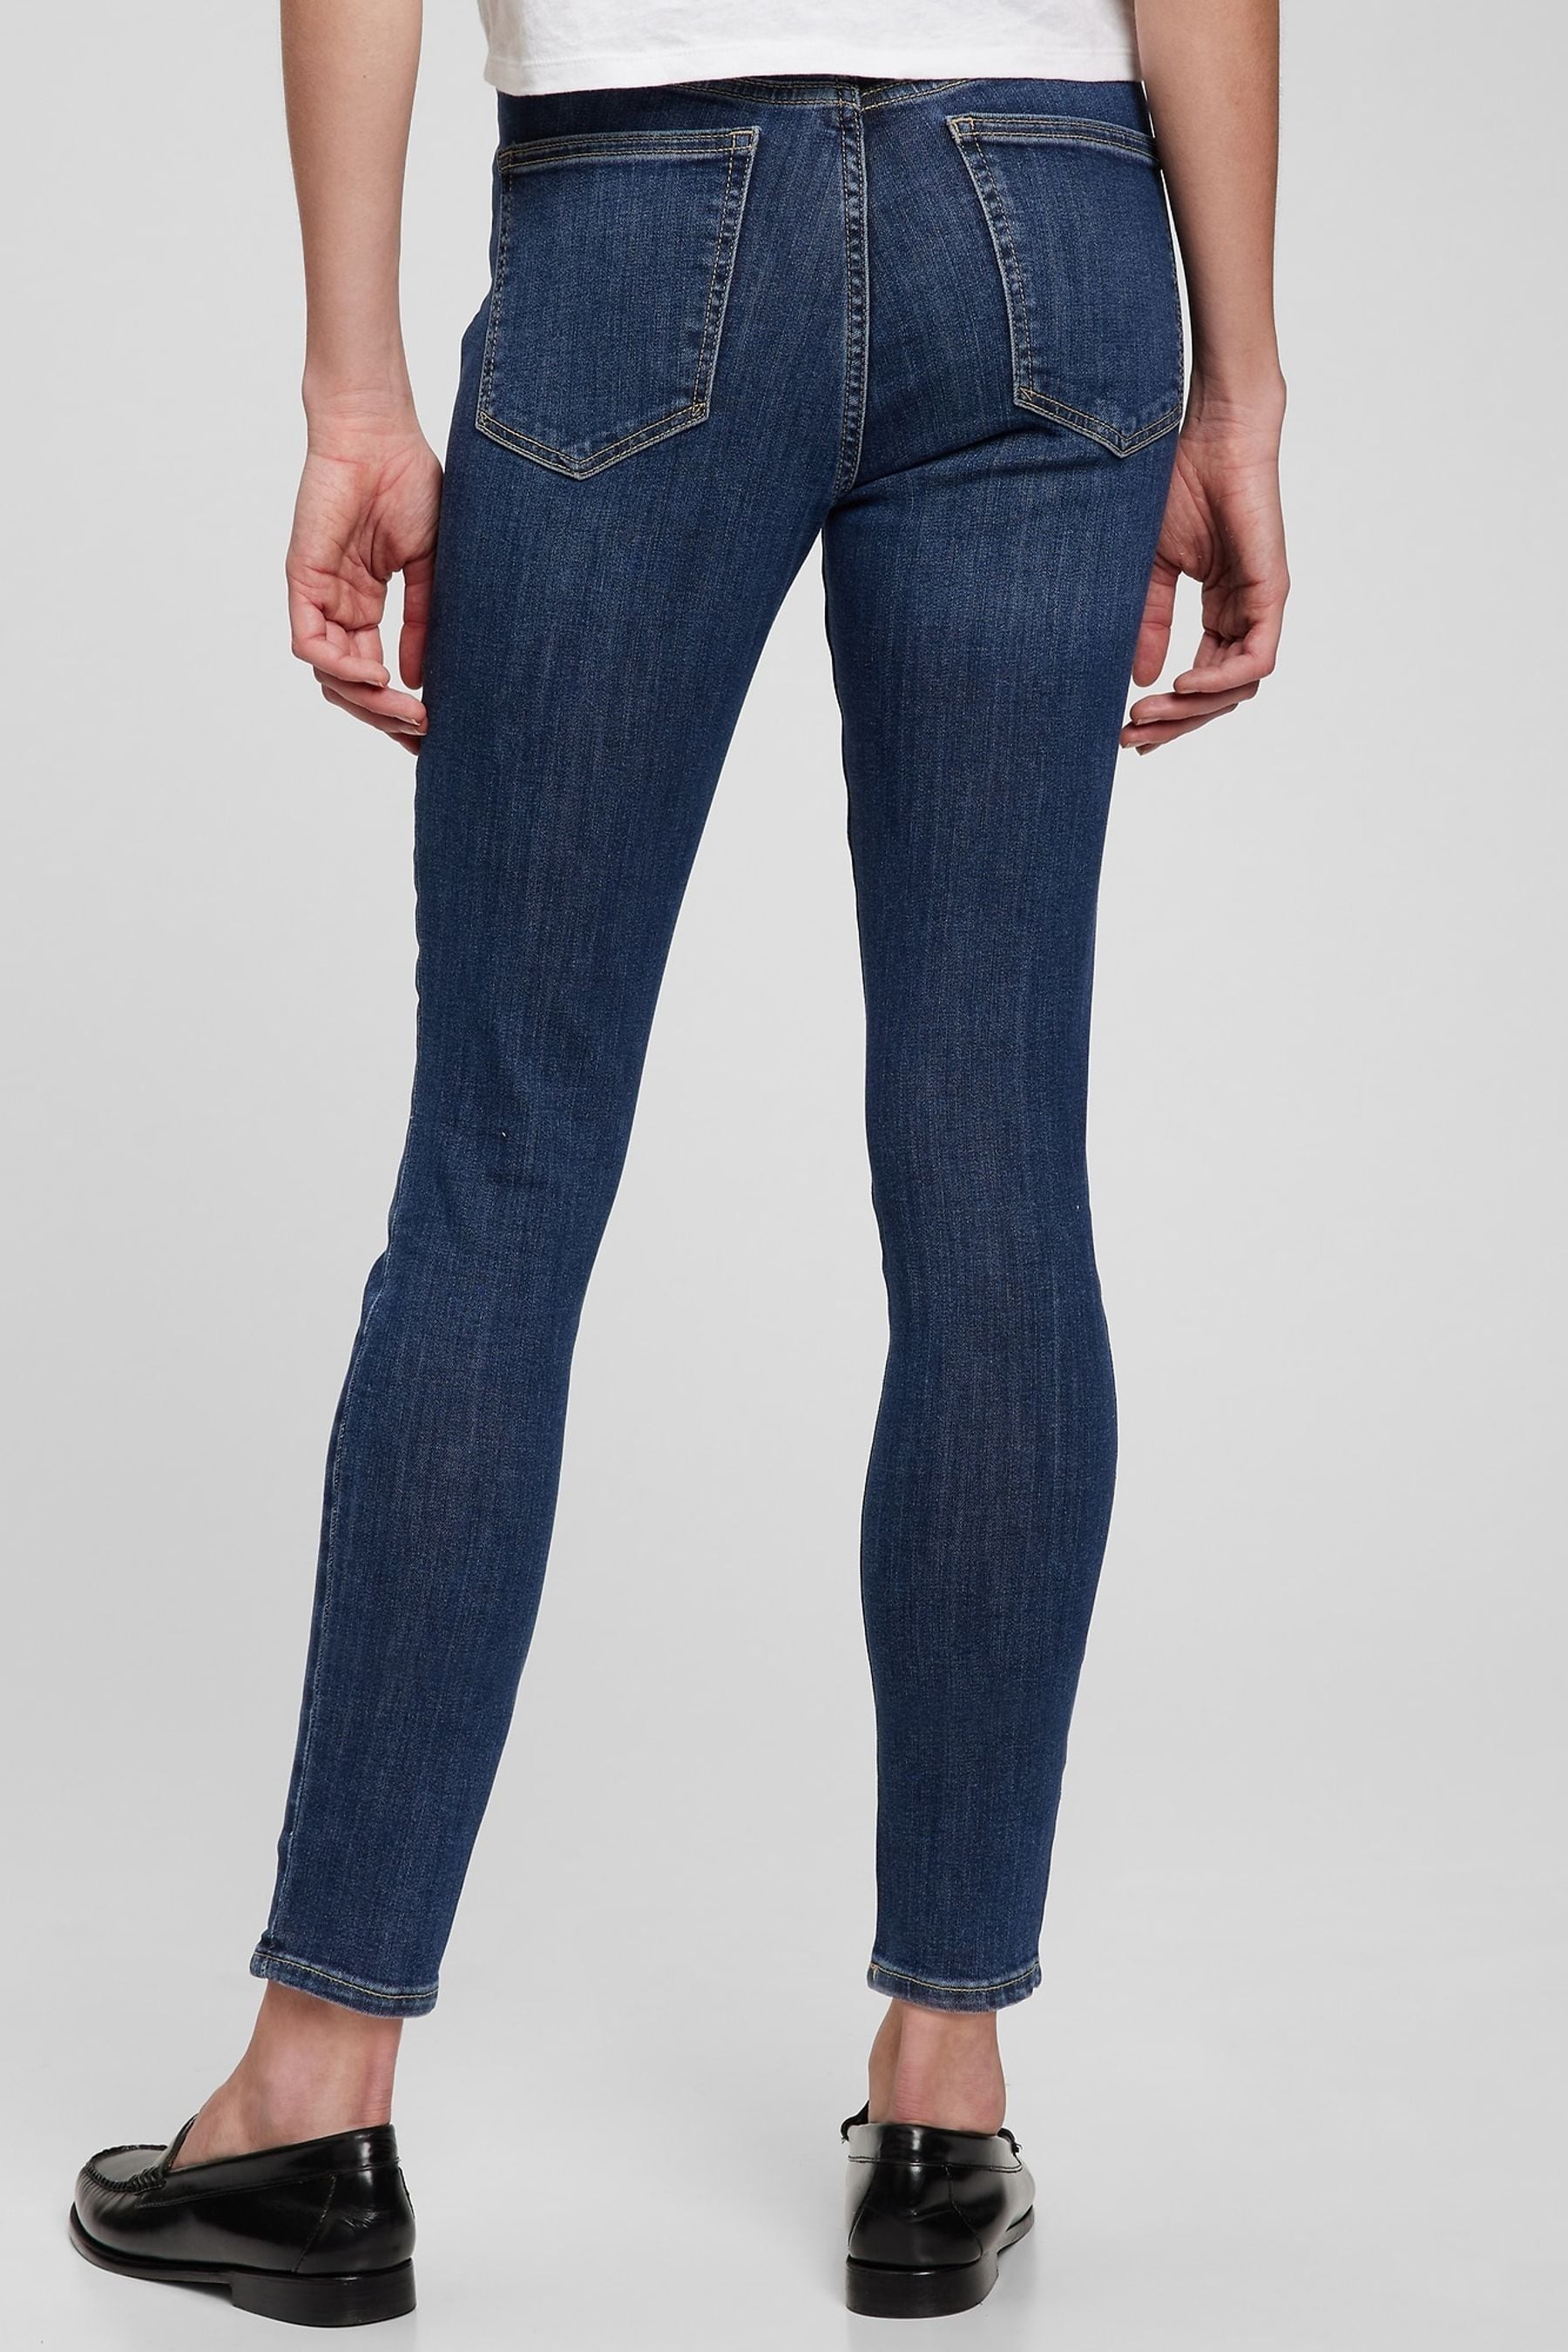 Buy Gap Mid Indigo Stretch High Waisted True Skinny Jeans from the Next ...